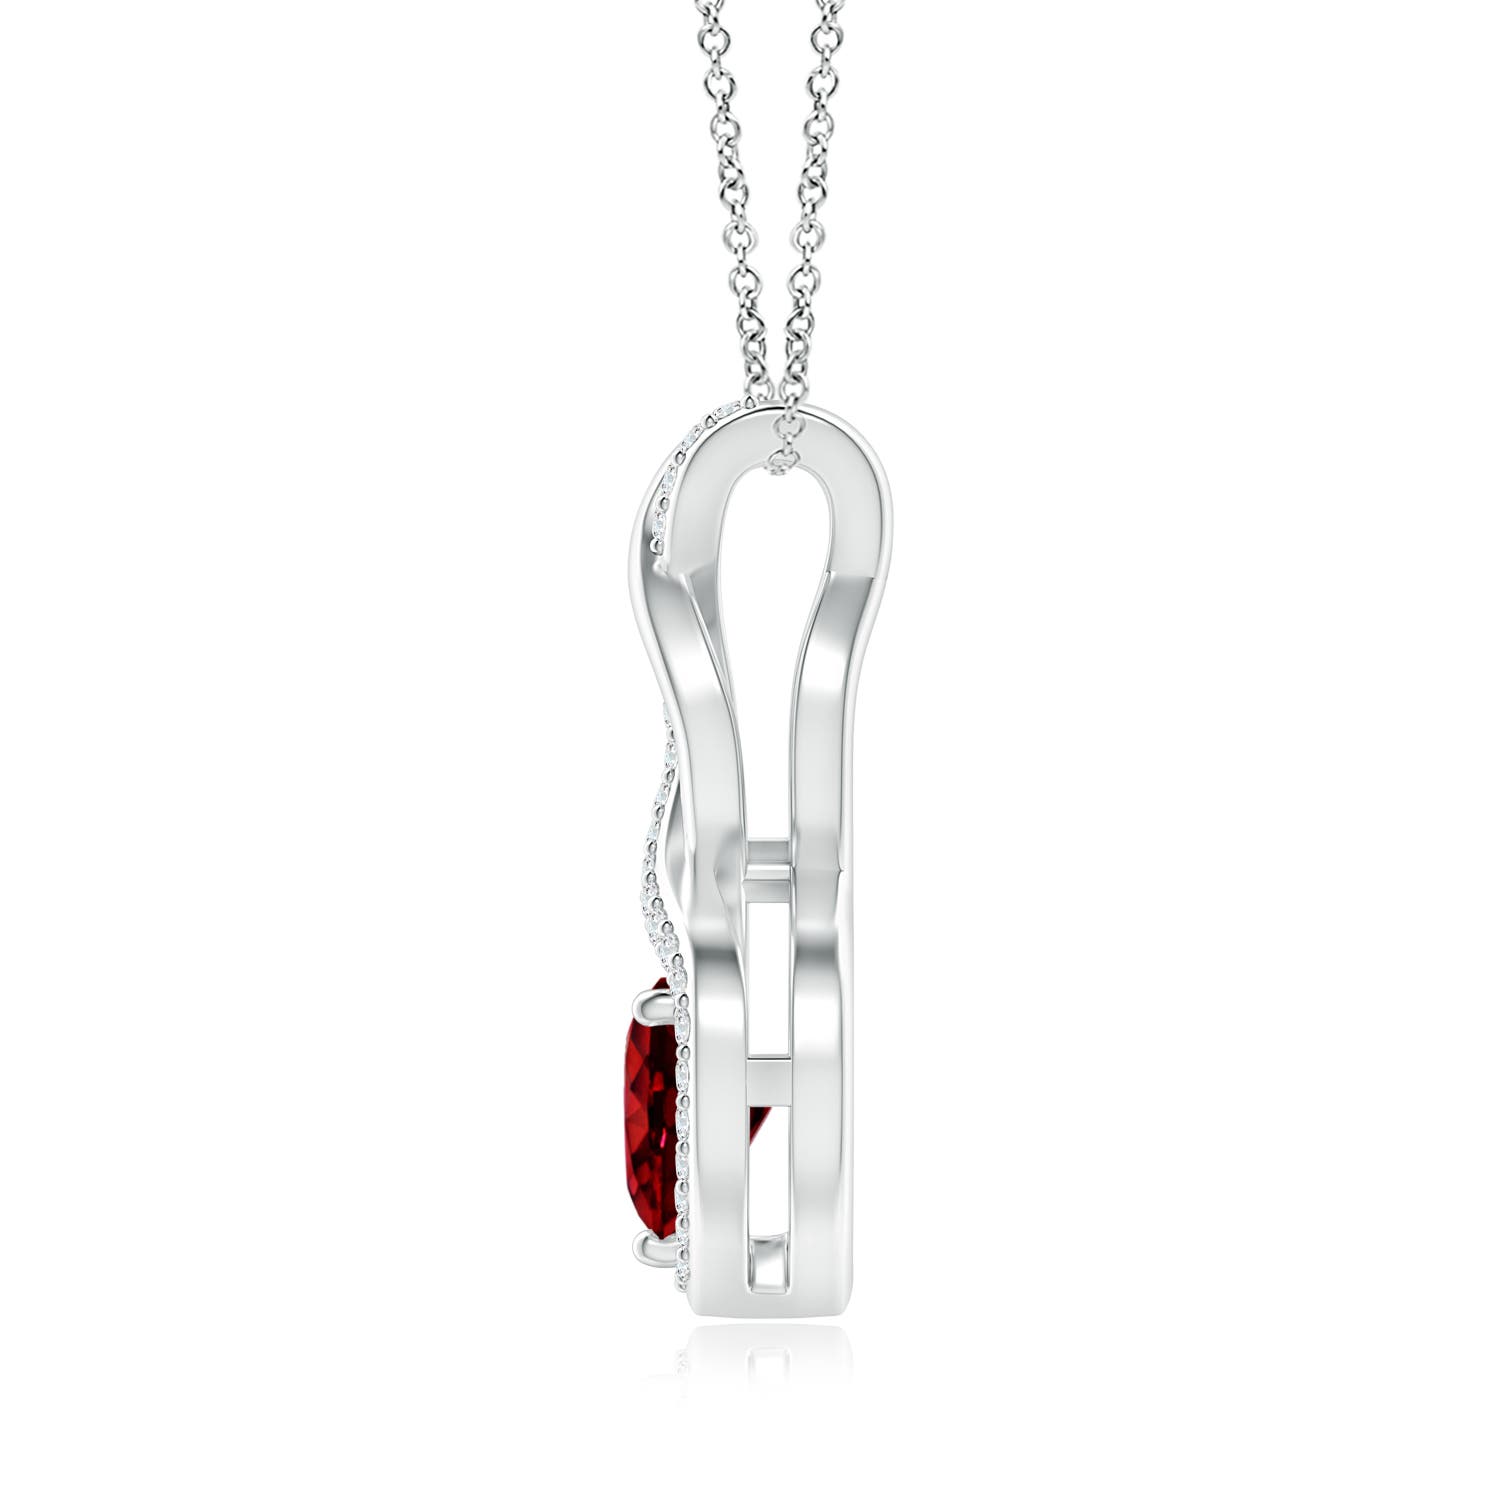 AAAA - Ruby / 0.88 CT / 14 KT White Gold